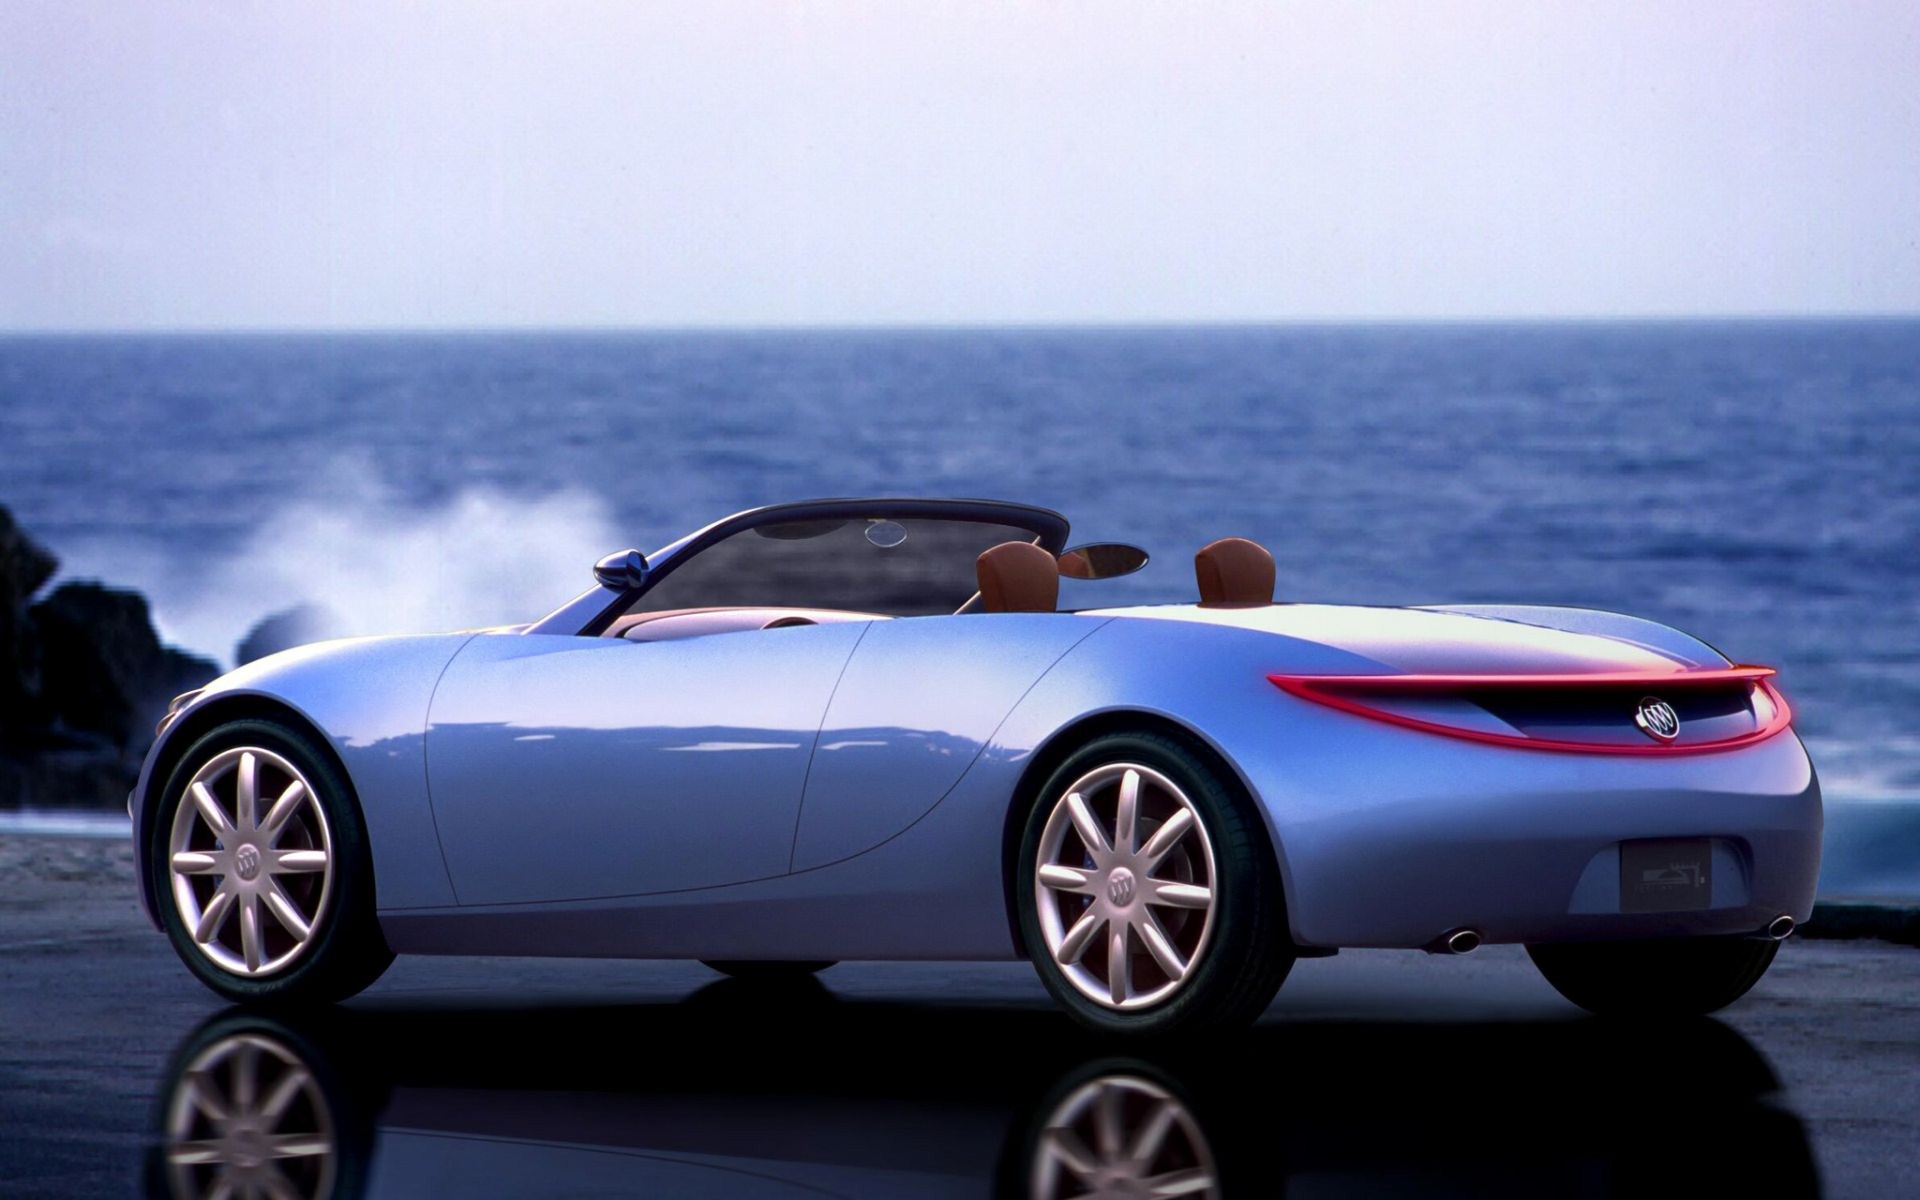 Vehicles 2001 Buick Bengal Roadster Concept HD Wallpaper | Background Image